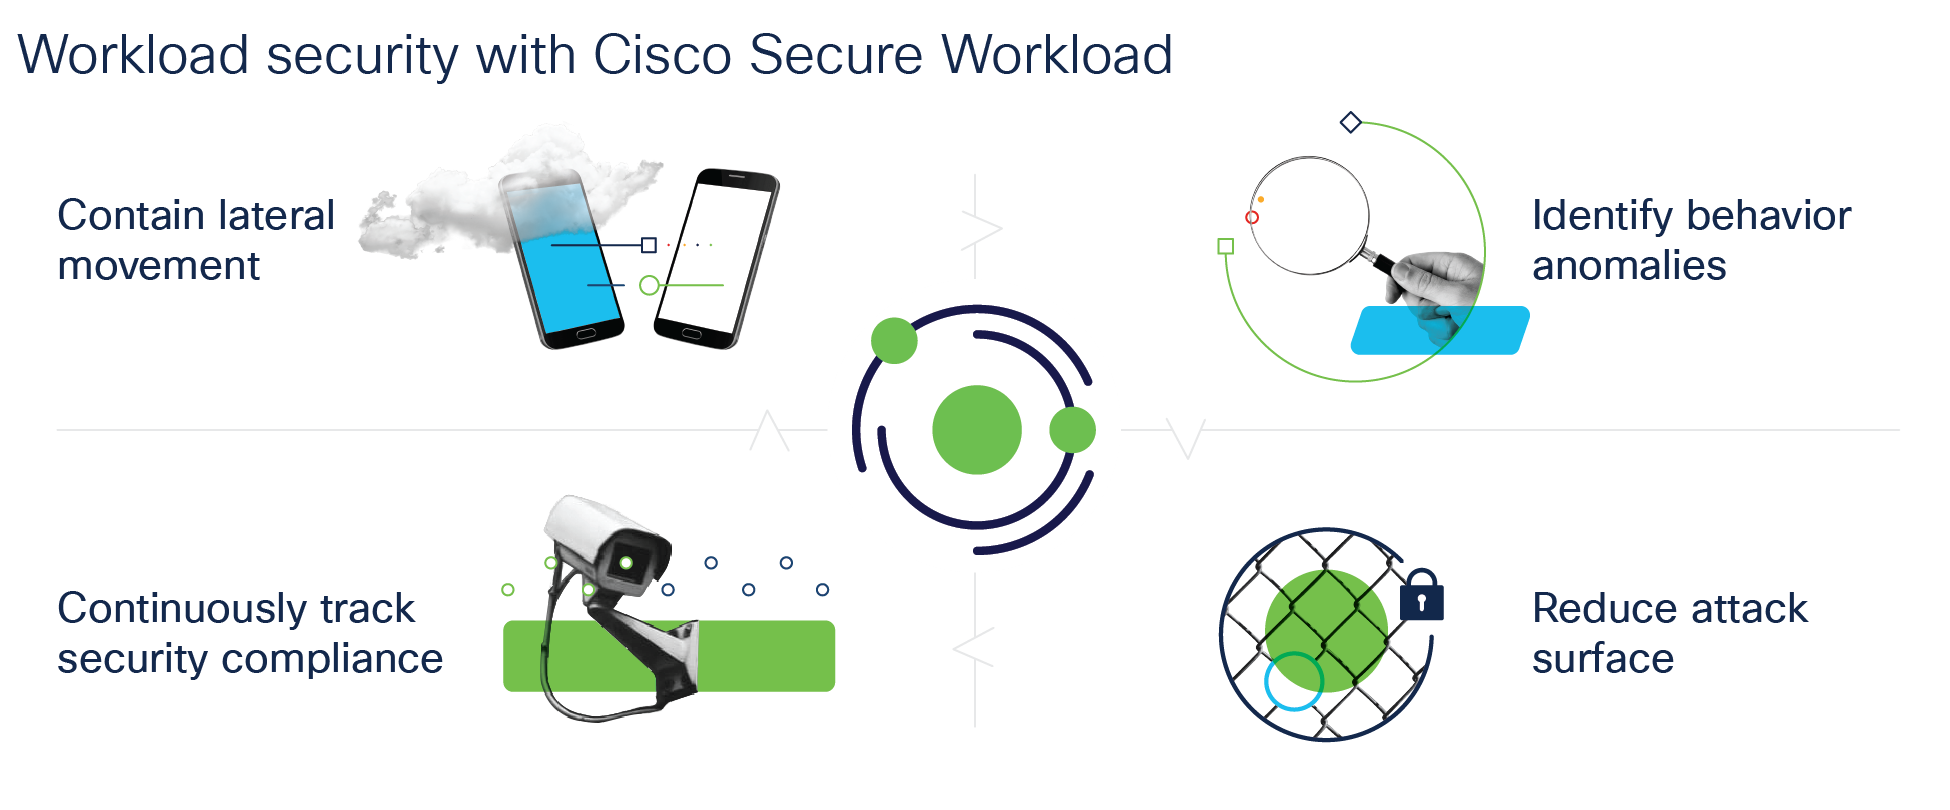 Workload security with Cisco Secure Workload